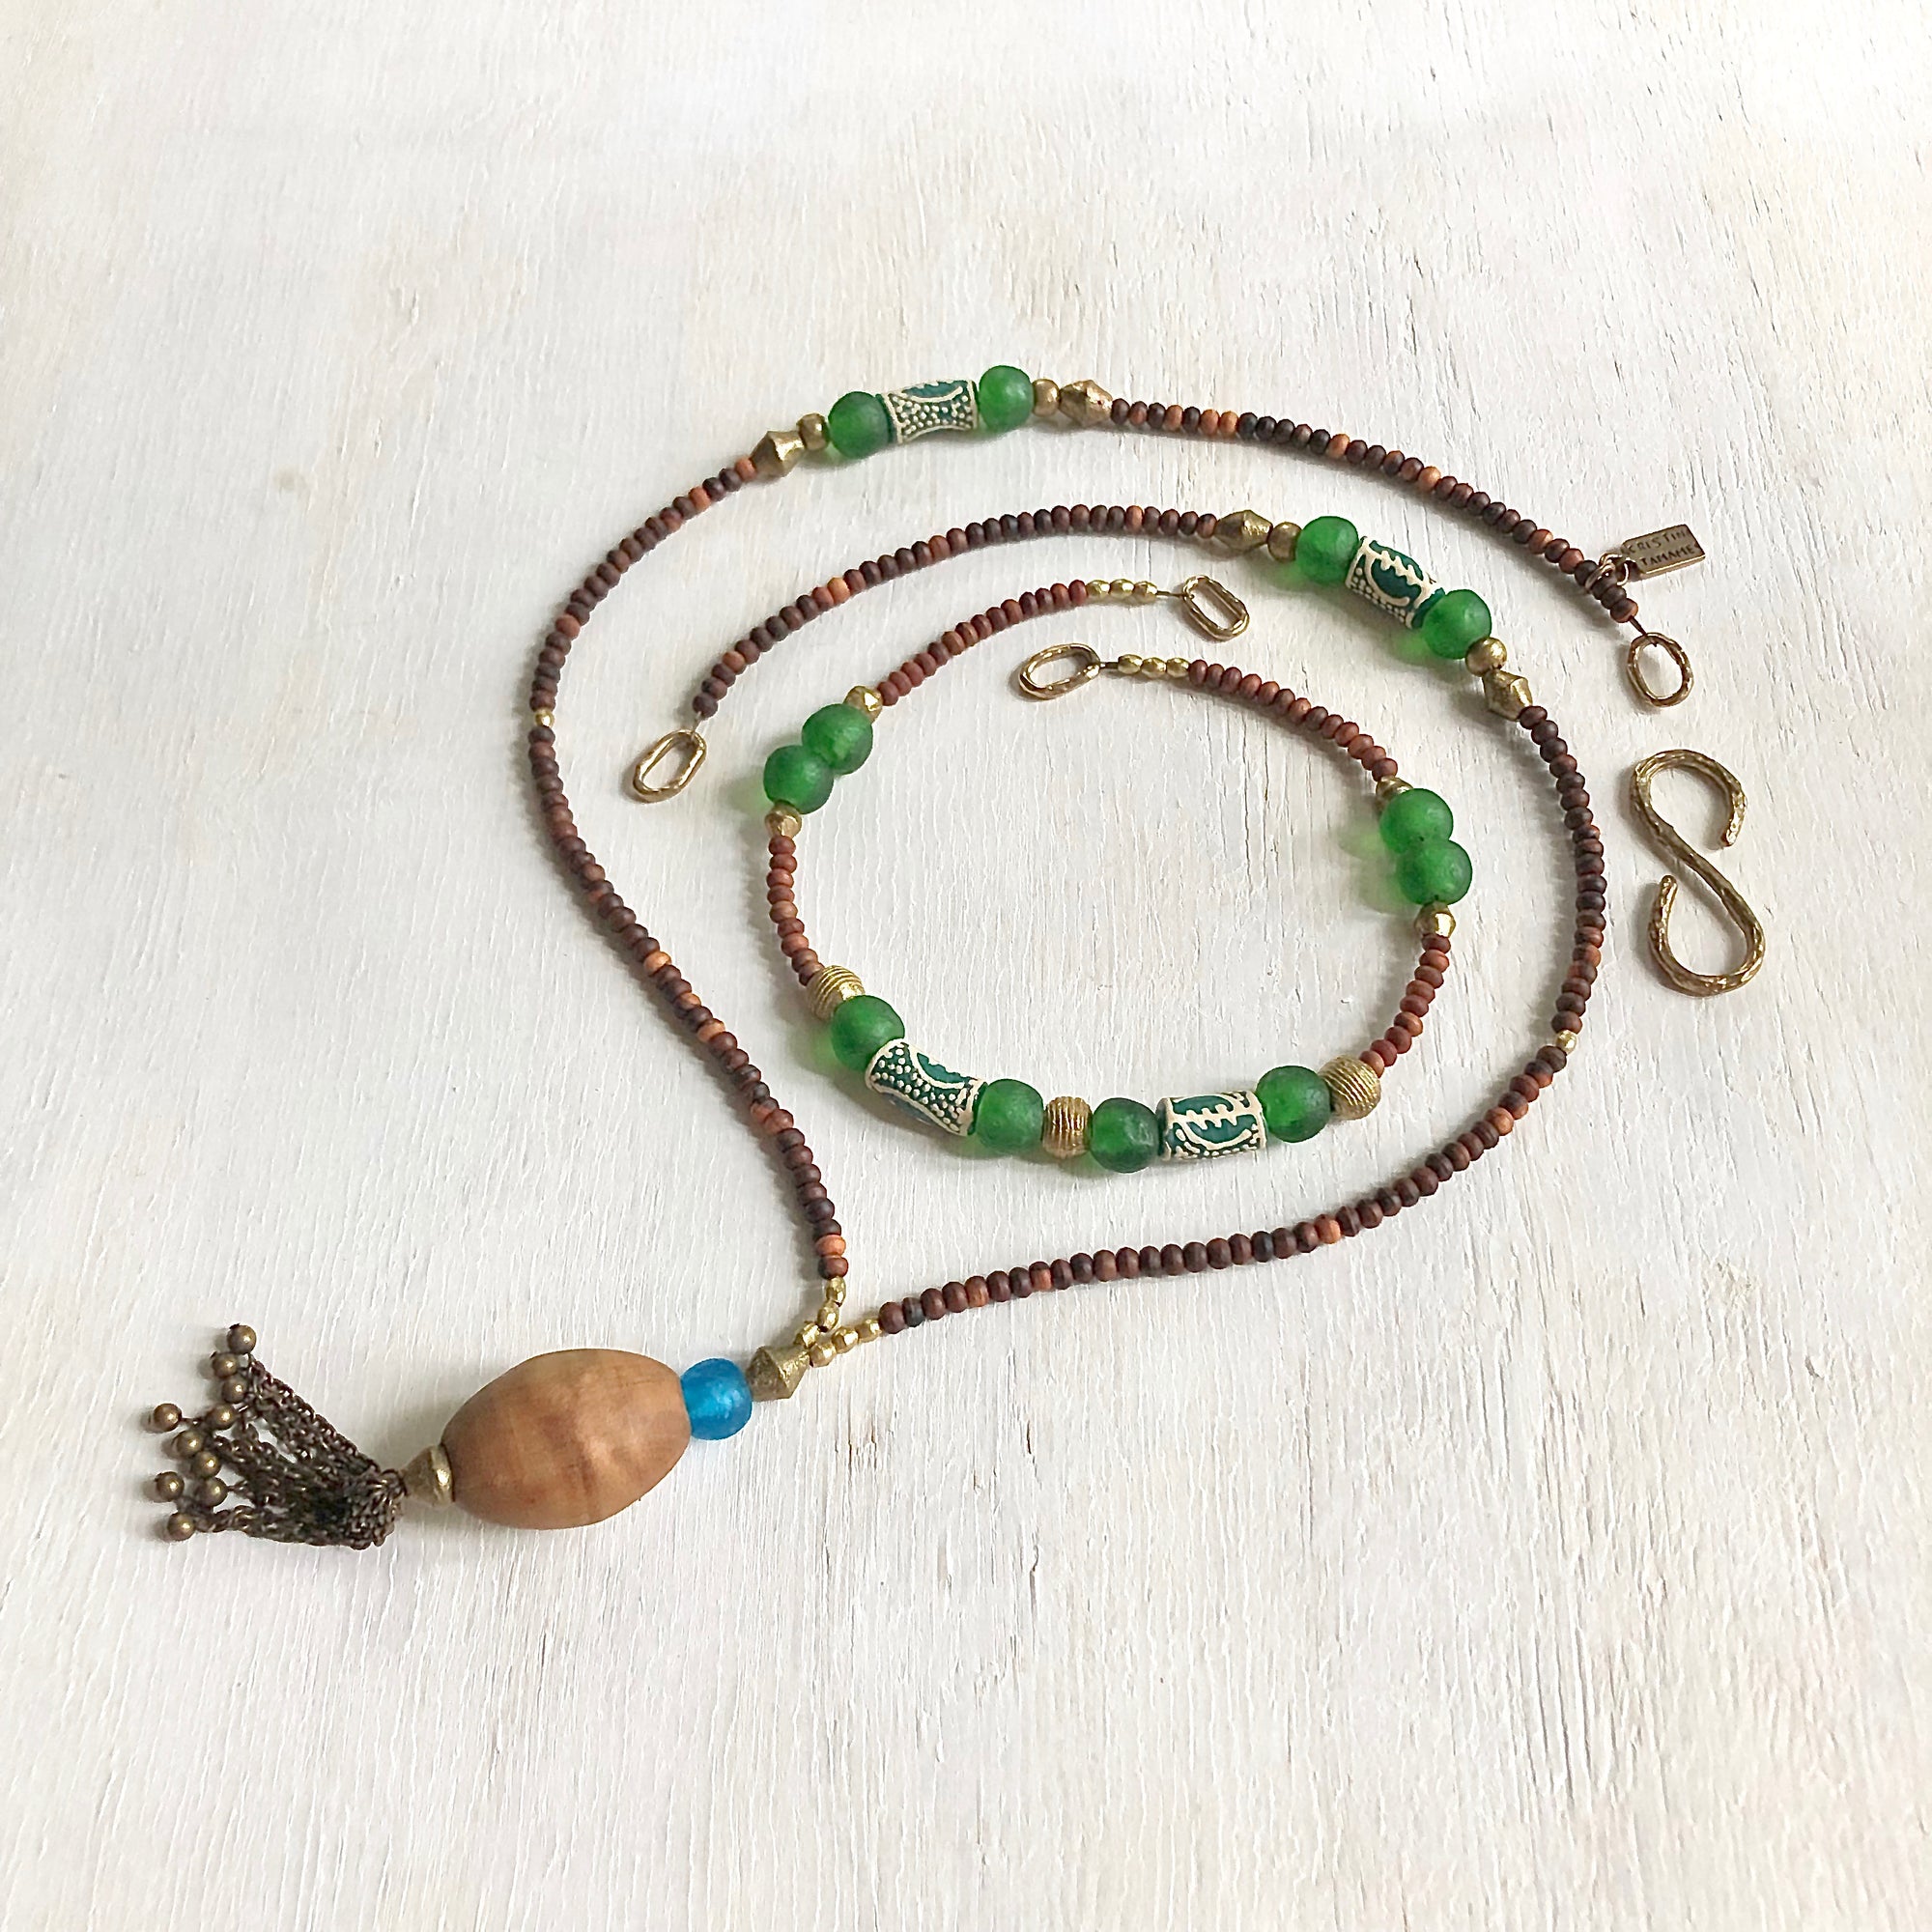 Hand painted green Adinkra African beads with vintage olive wood pendant long necklace. Cristina Tamames Jewelry Designer